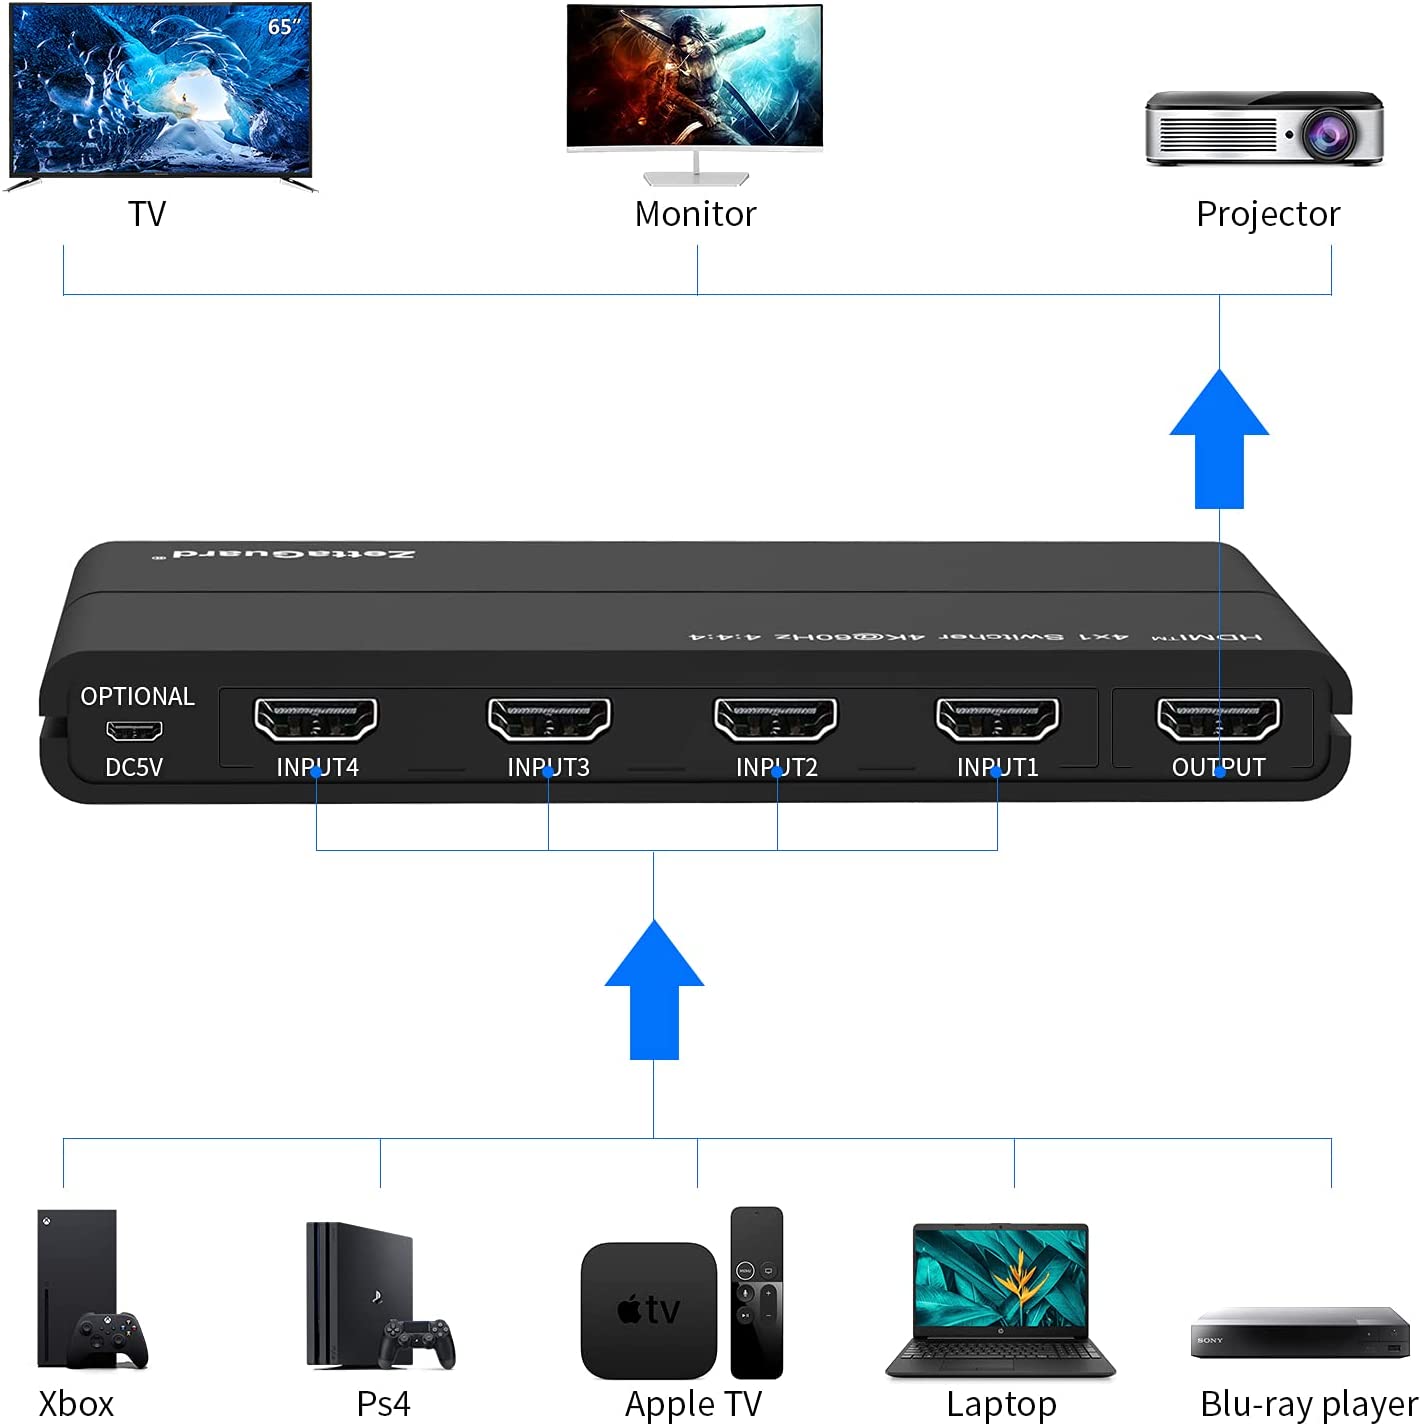 Zettaguard HDMI 2.0 Switcher Supports 4K HDR 4 Ports Hi-Speed 18Gbps HDCP 2.2, Auto-switching, IR Remote - Compatible with Apple Tv, Roku, Xbox/PS4, Blu-Ray, Macbook, Laptop, PC, TV for Home or Office - image 3 of 10